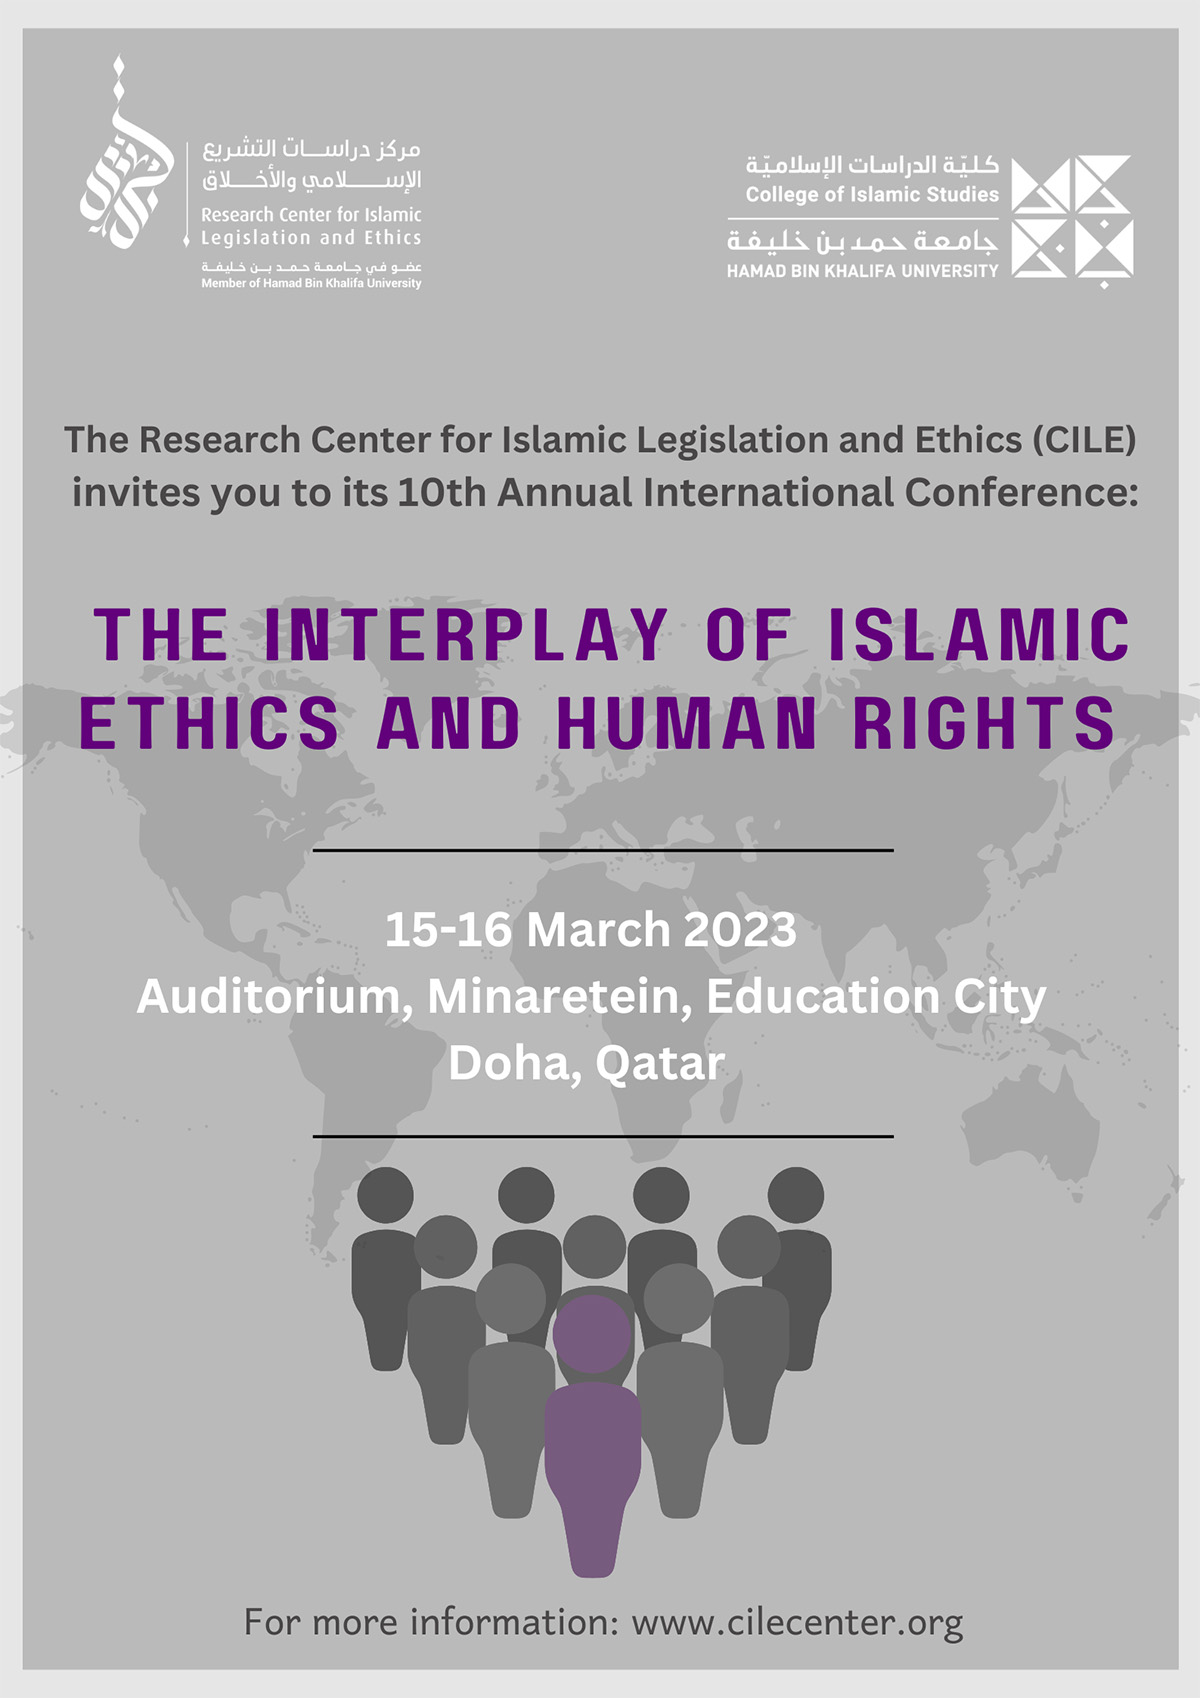 CILE 10th Annual International Conference